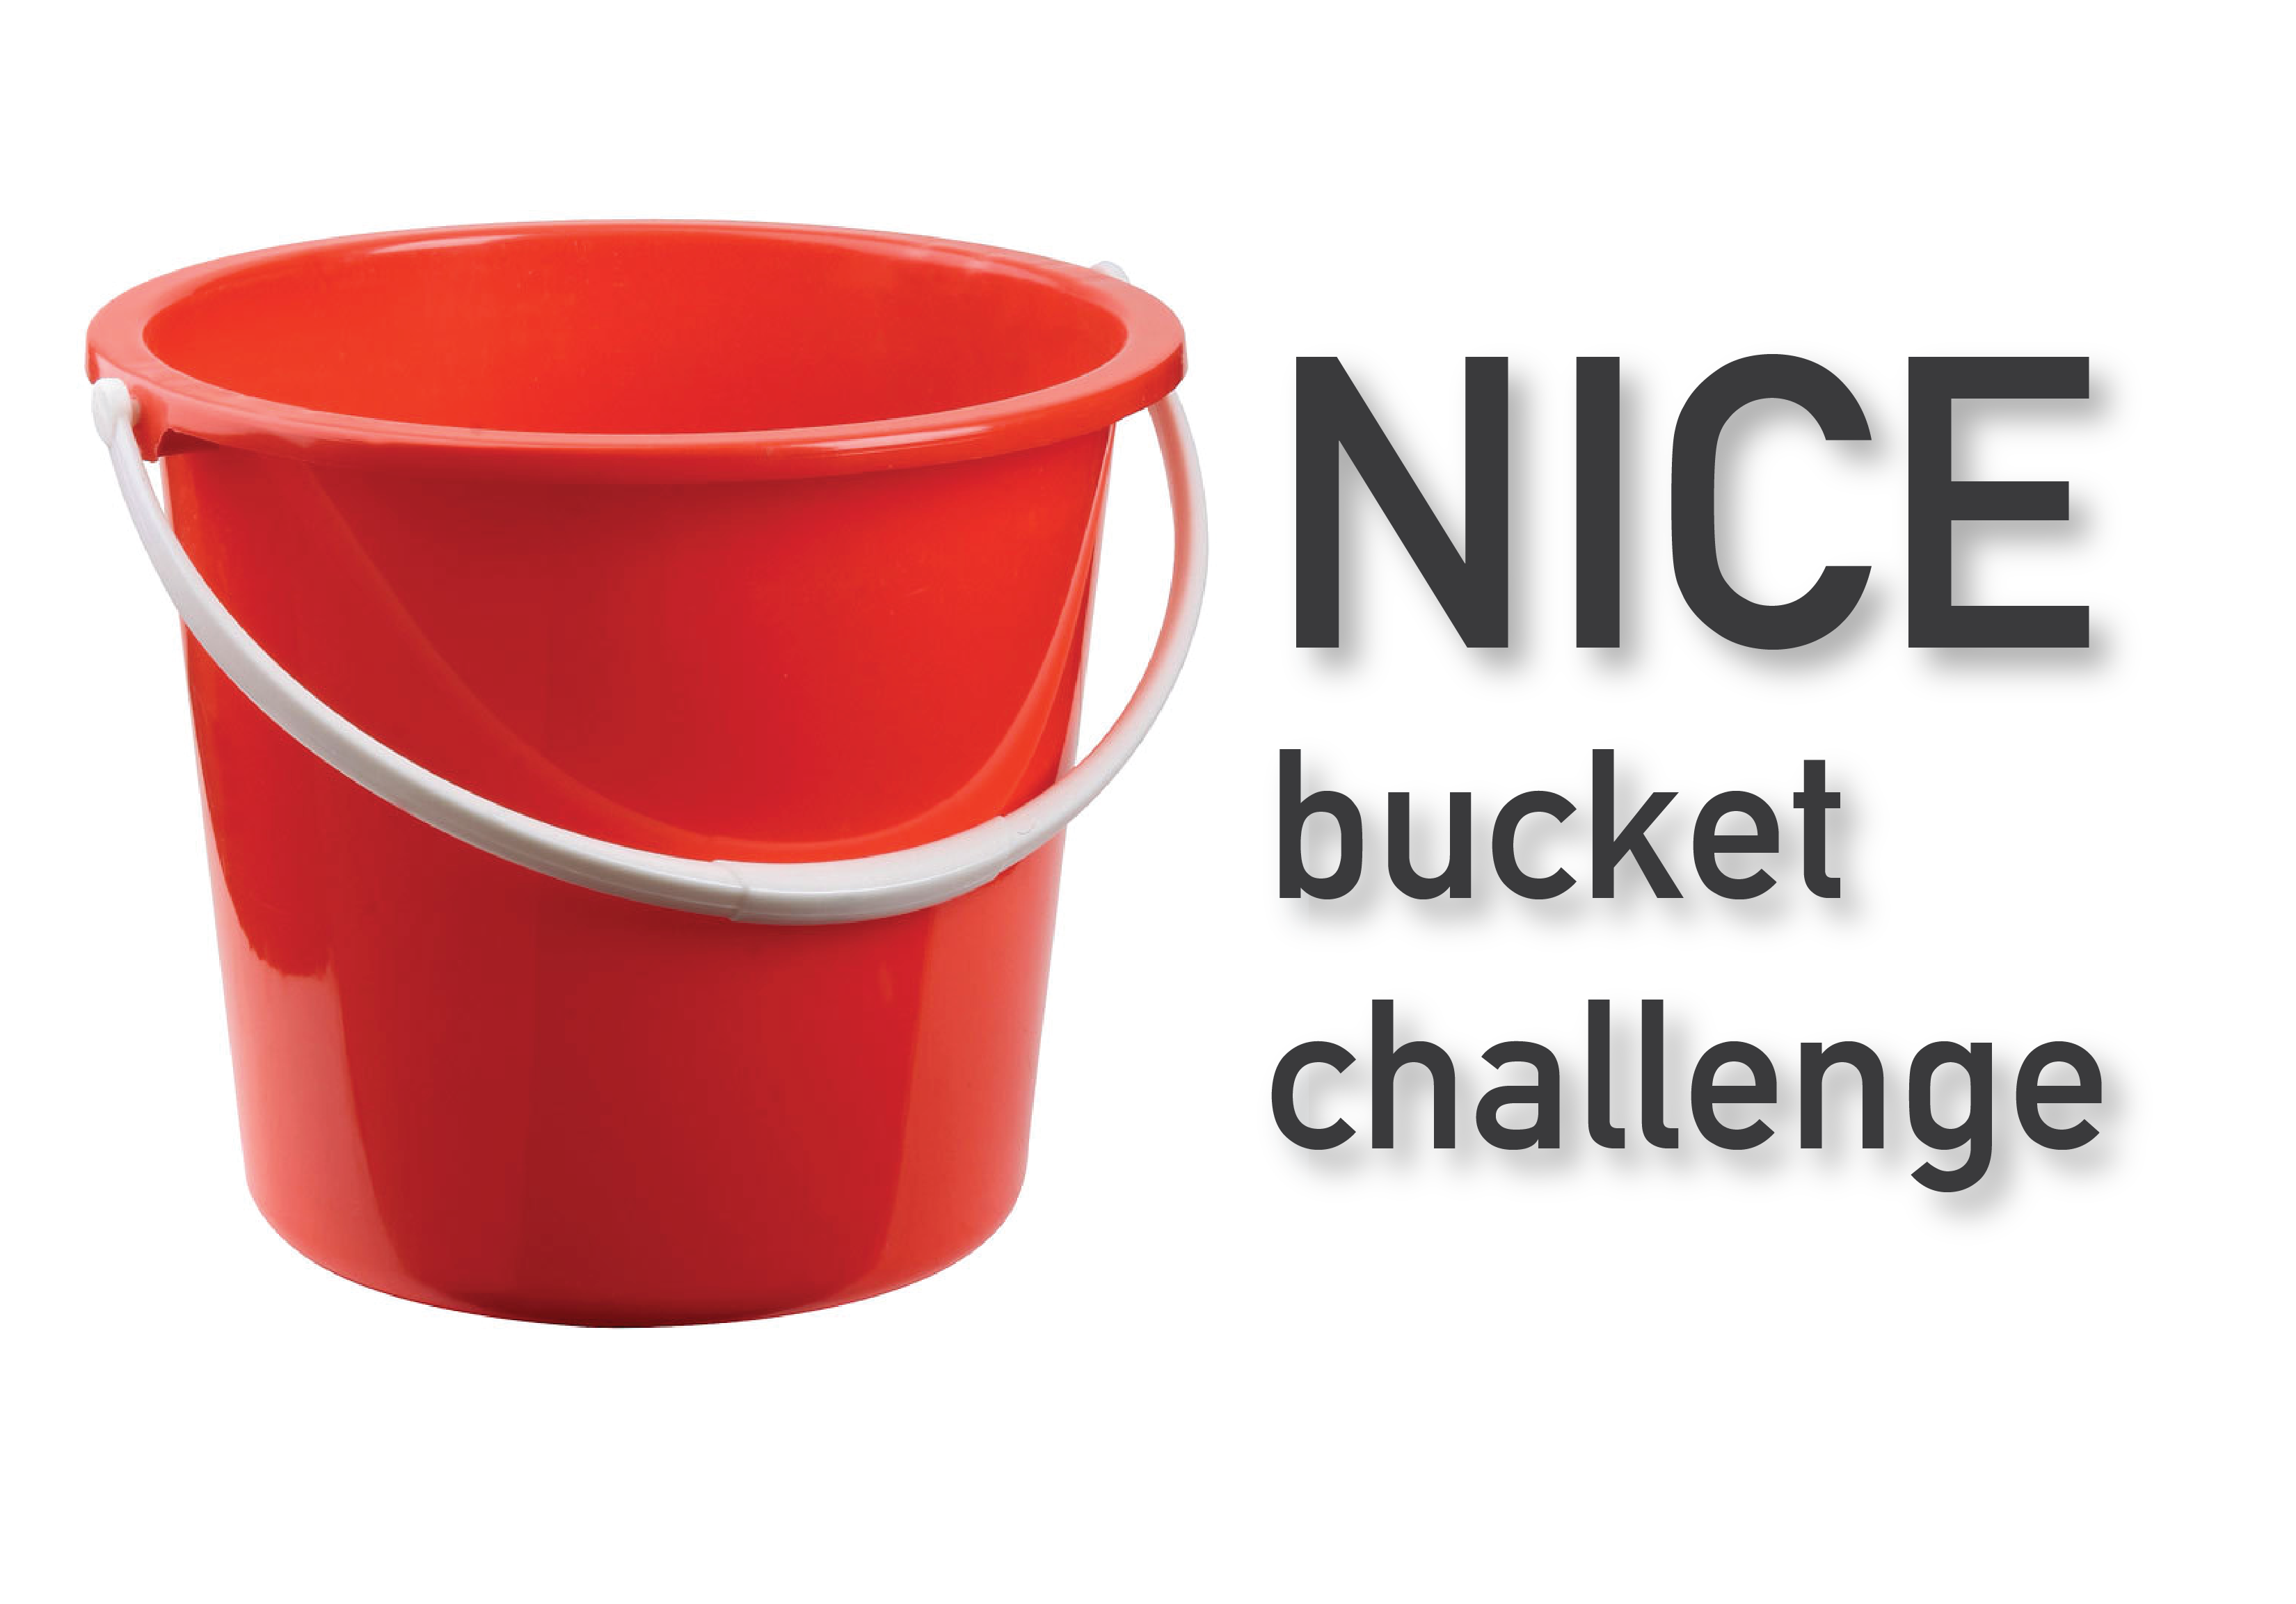 “NICE” Bucket Challenge: A social trend you’ll never get tired of seeing